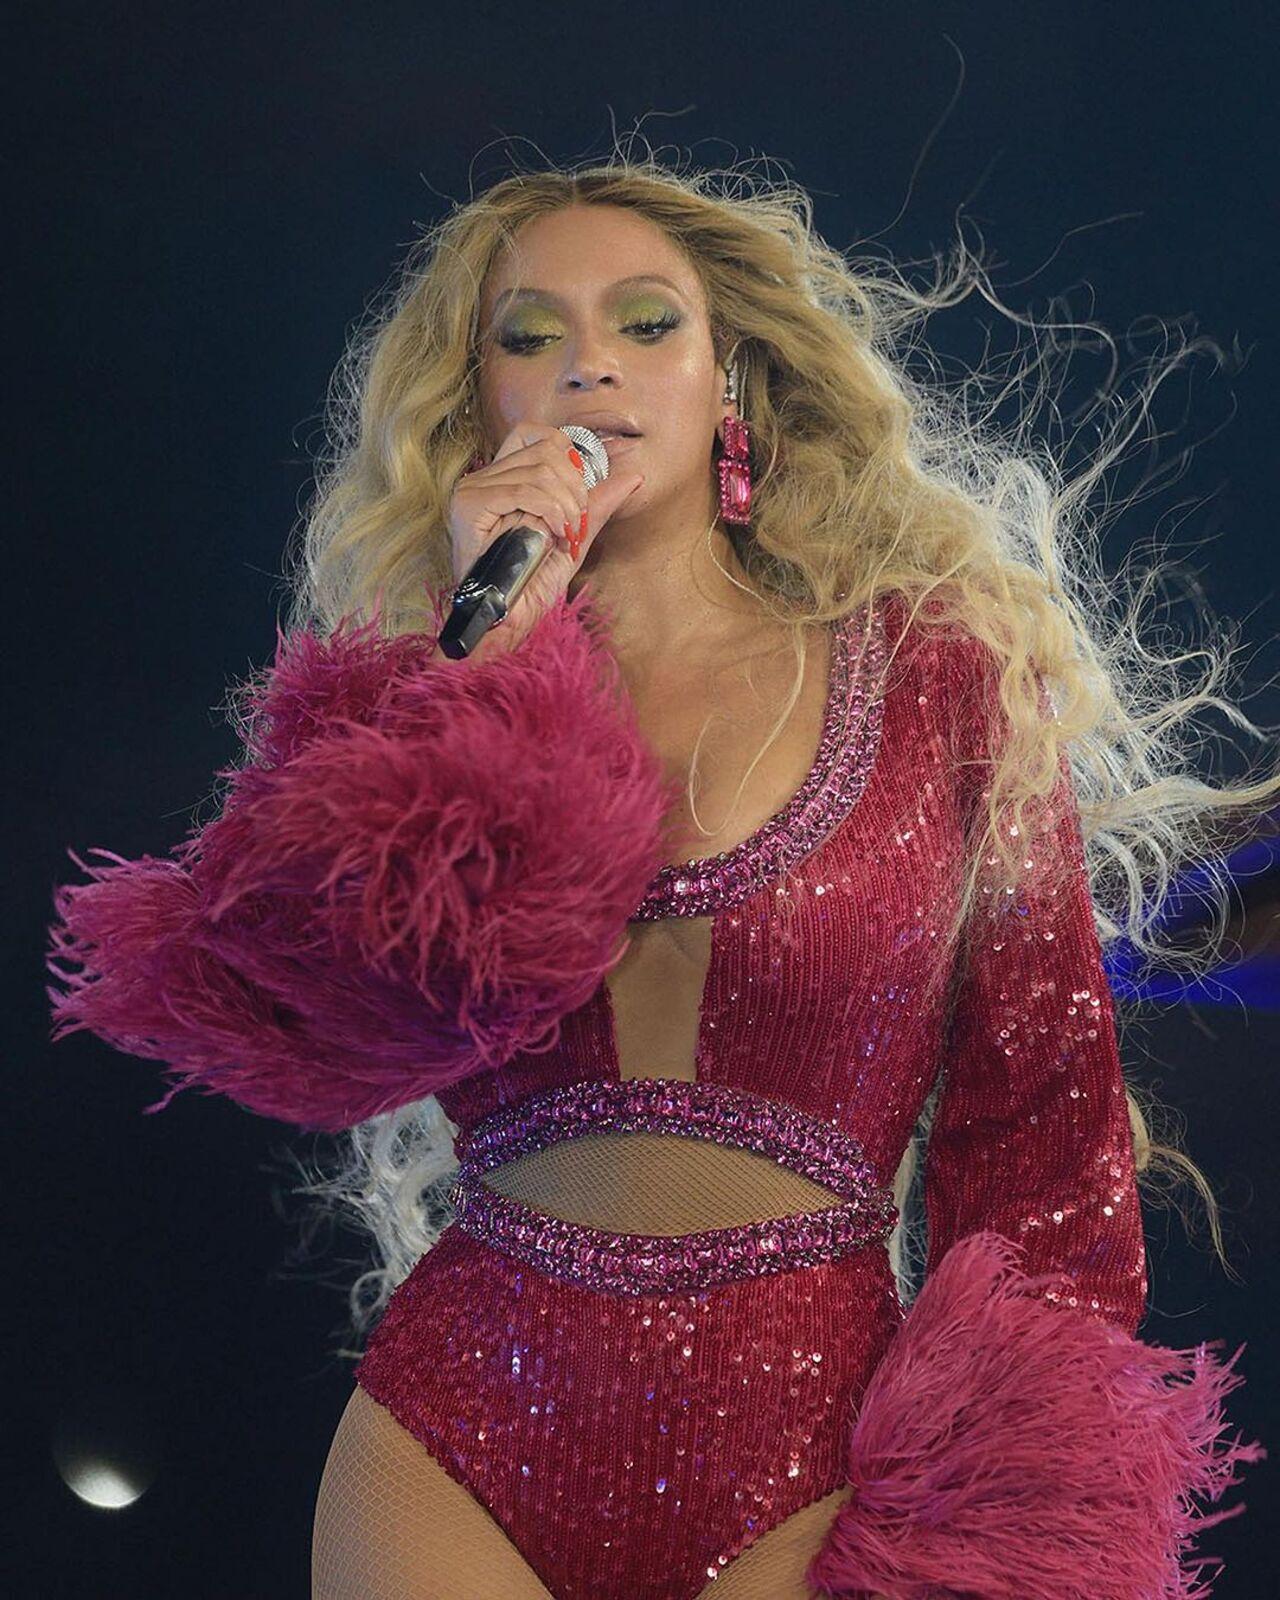 All glitter, some pink and throw in pom-pom style appendages for good measure! Beyonce is the queen of pop as is, and took her title to another level with this Barbiecore stage outfit